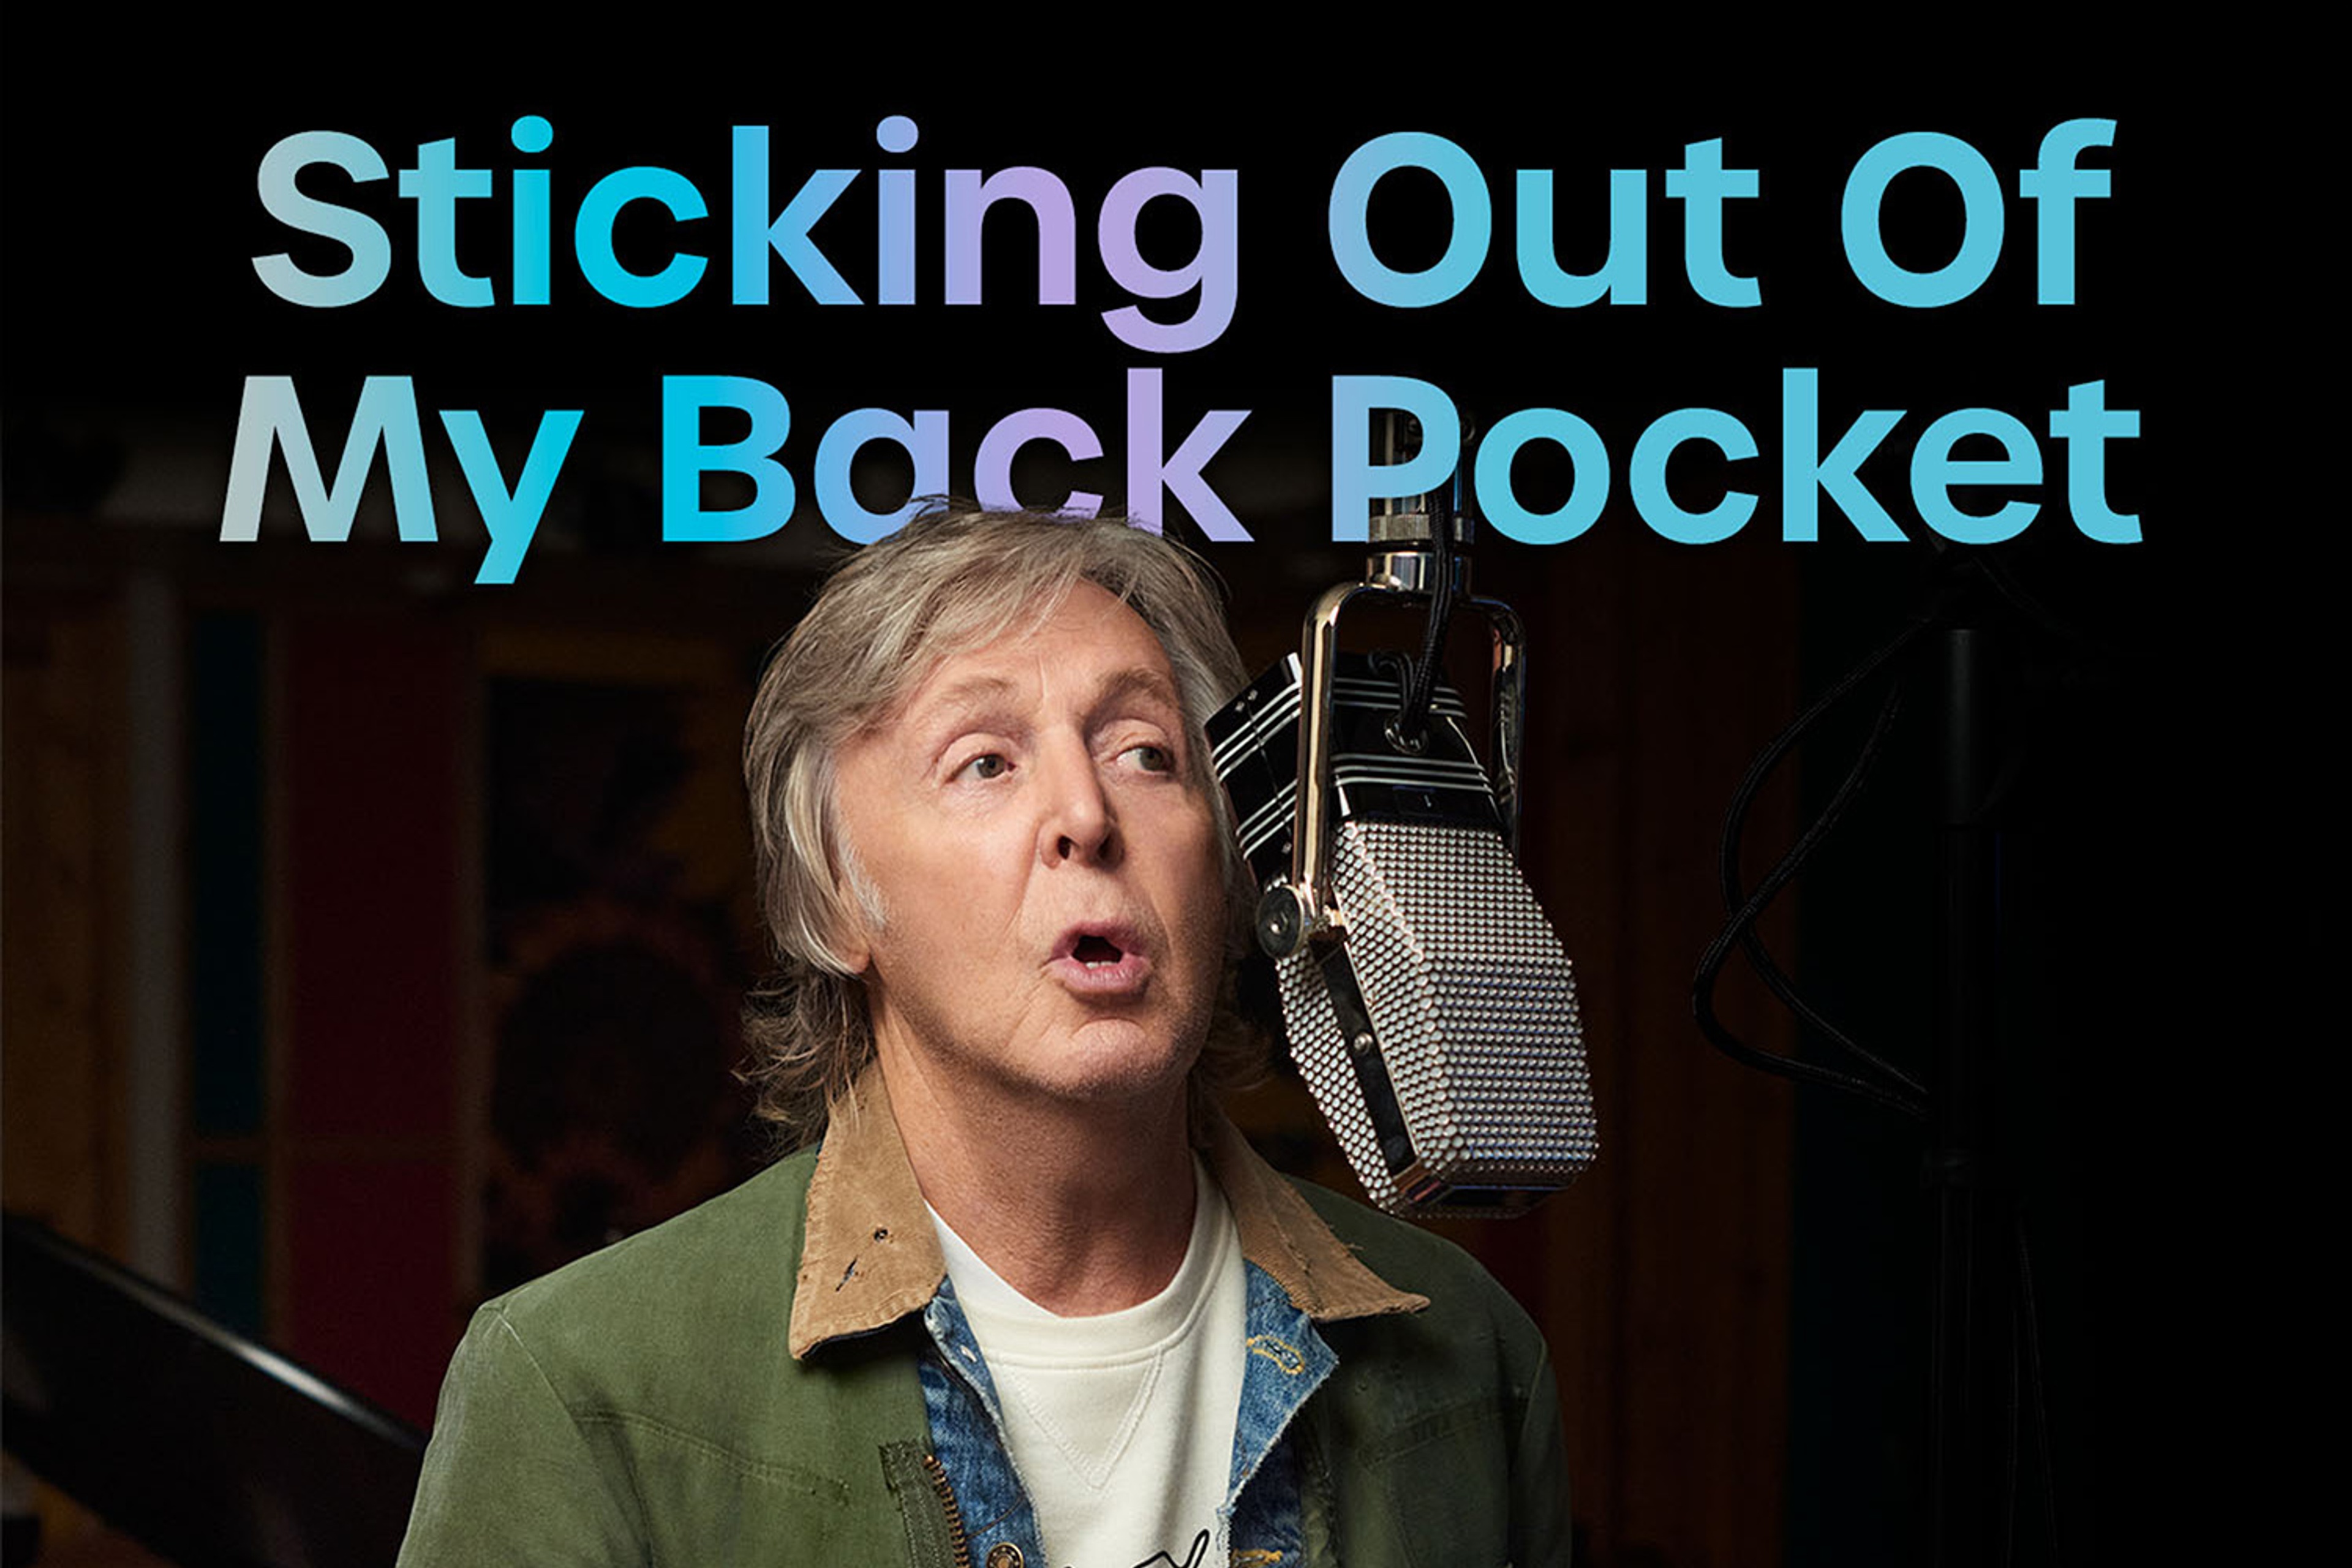 Graphic image used for November edition of the 'Sticking Out Of My Back Pocket'